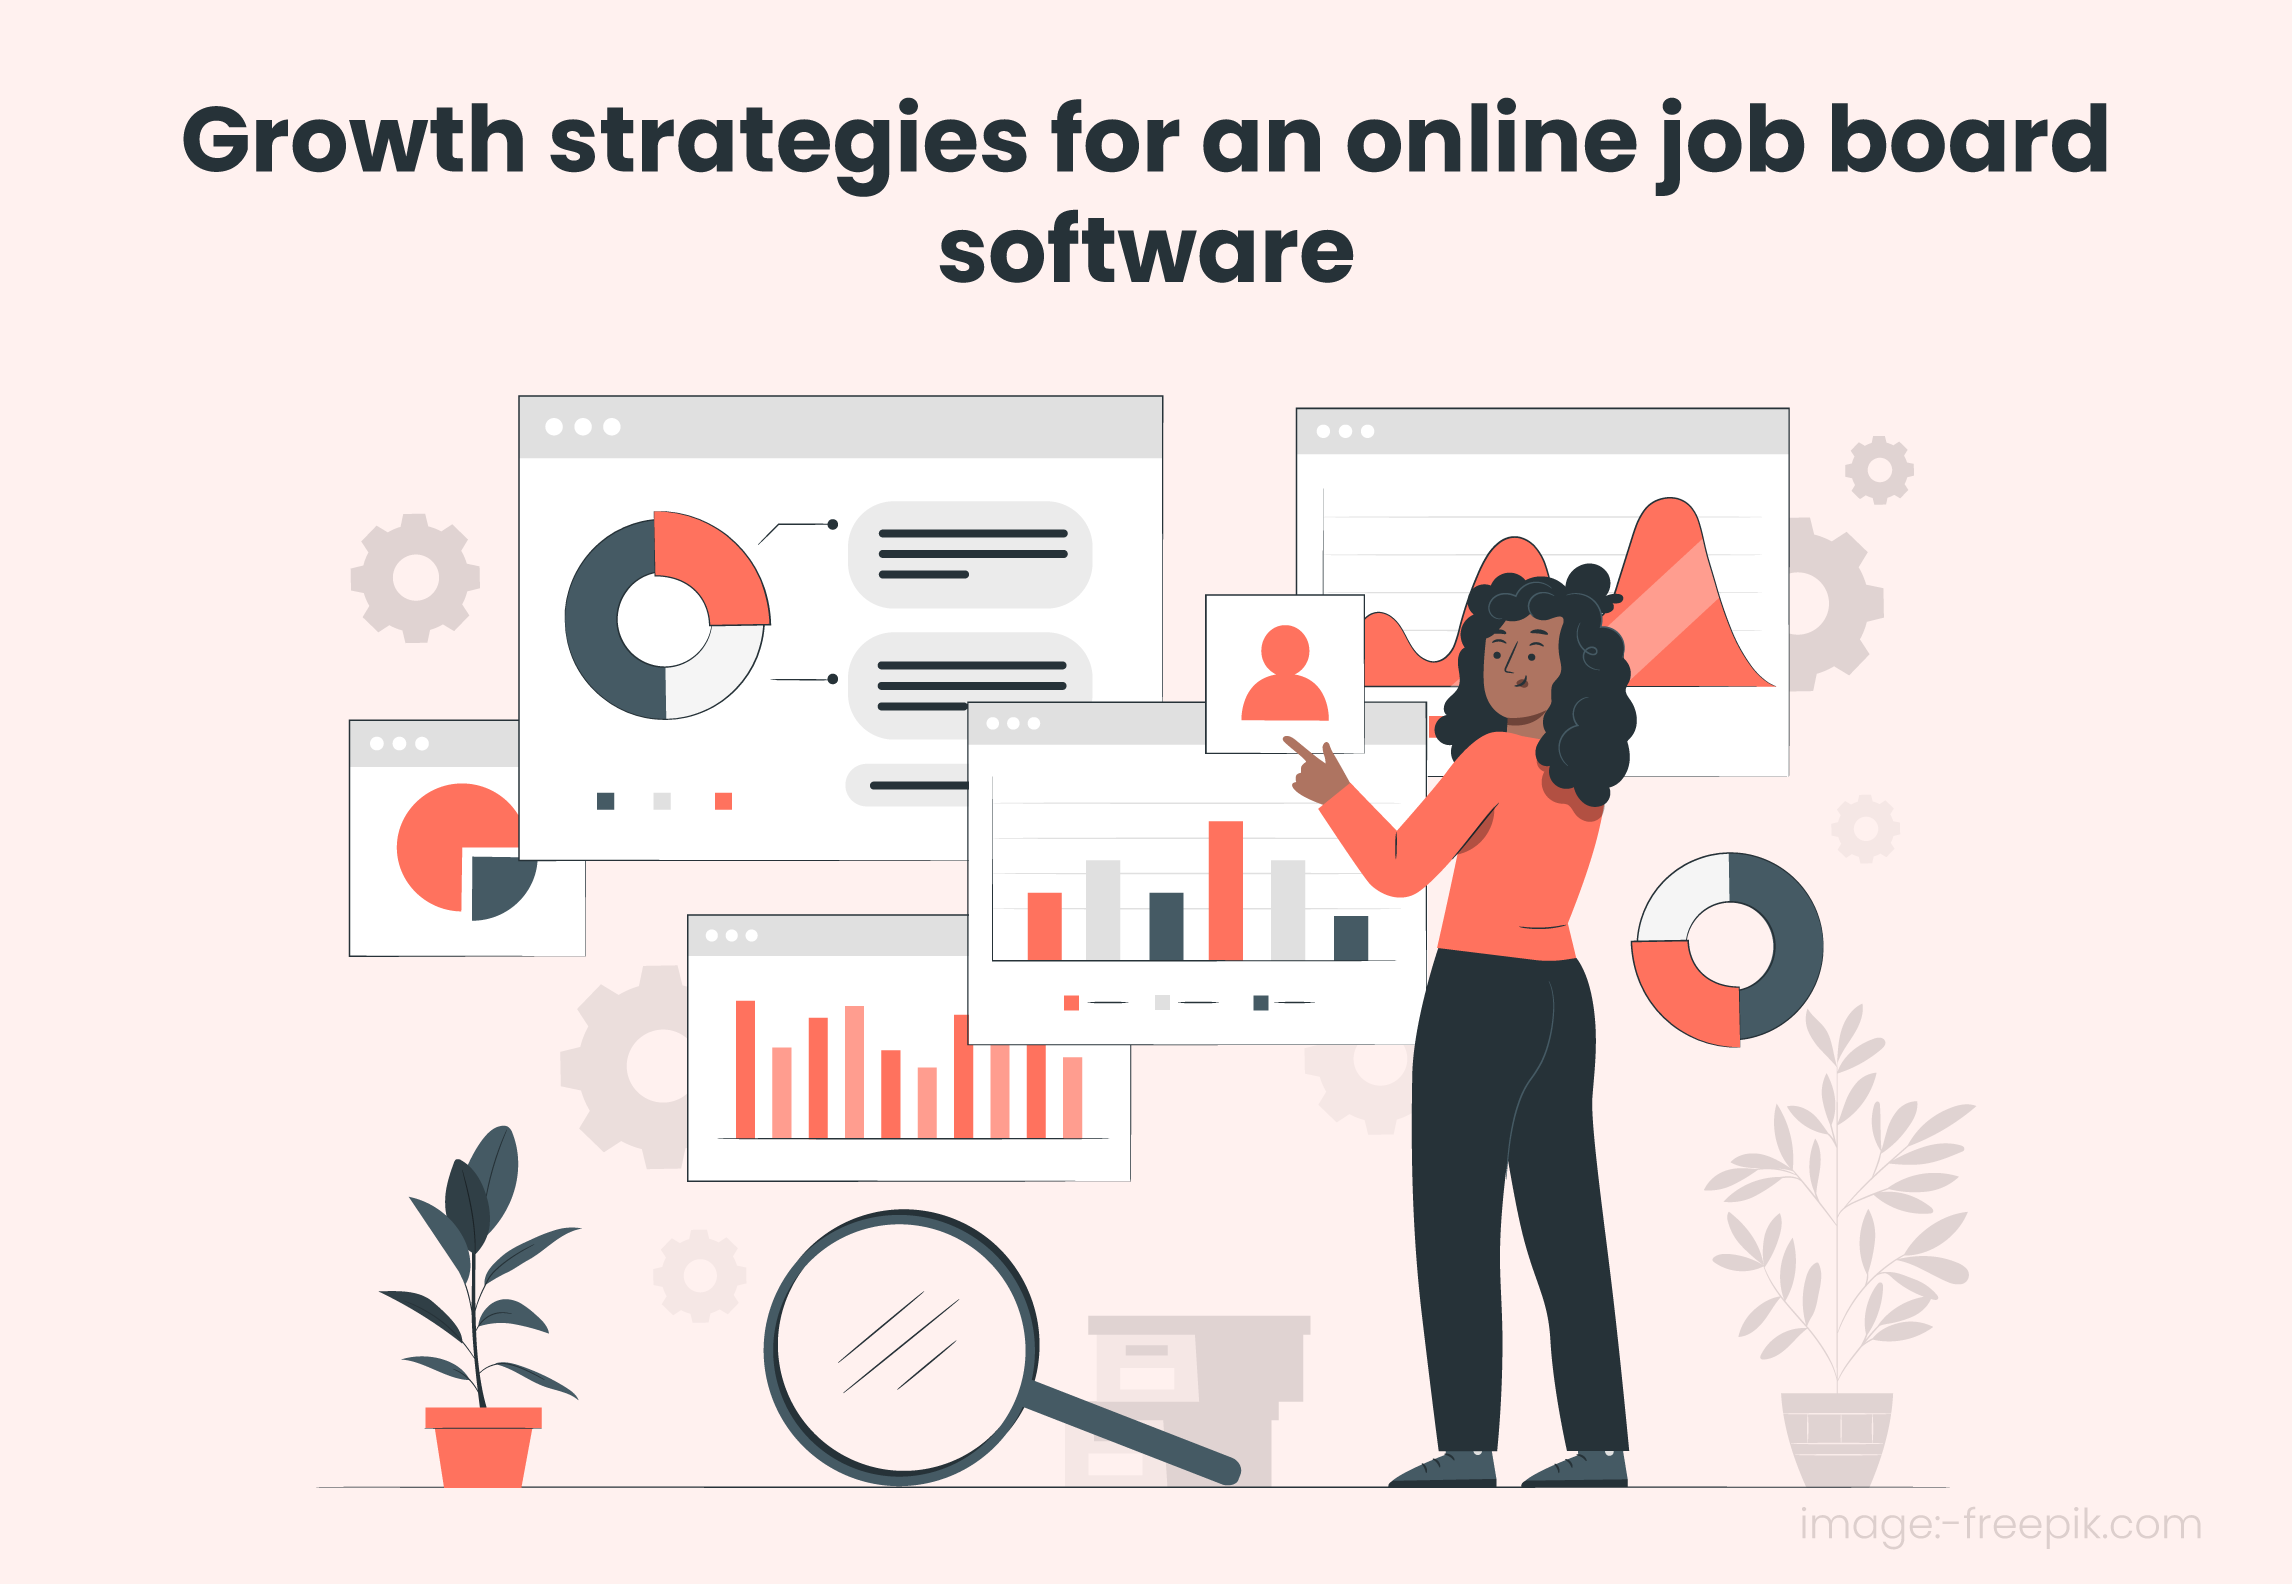 Growth strategies for an online job board software